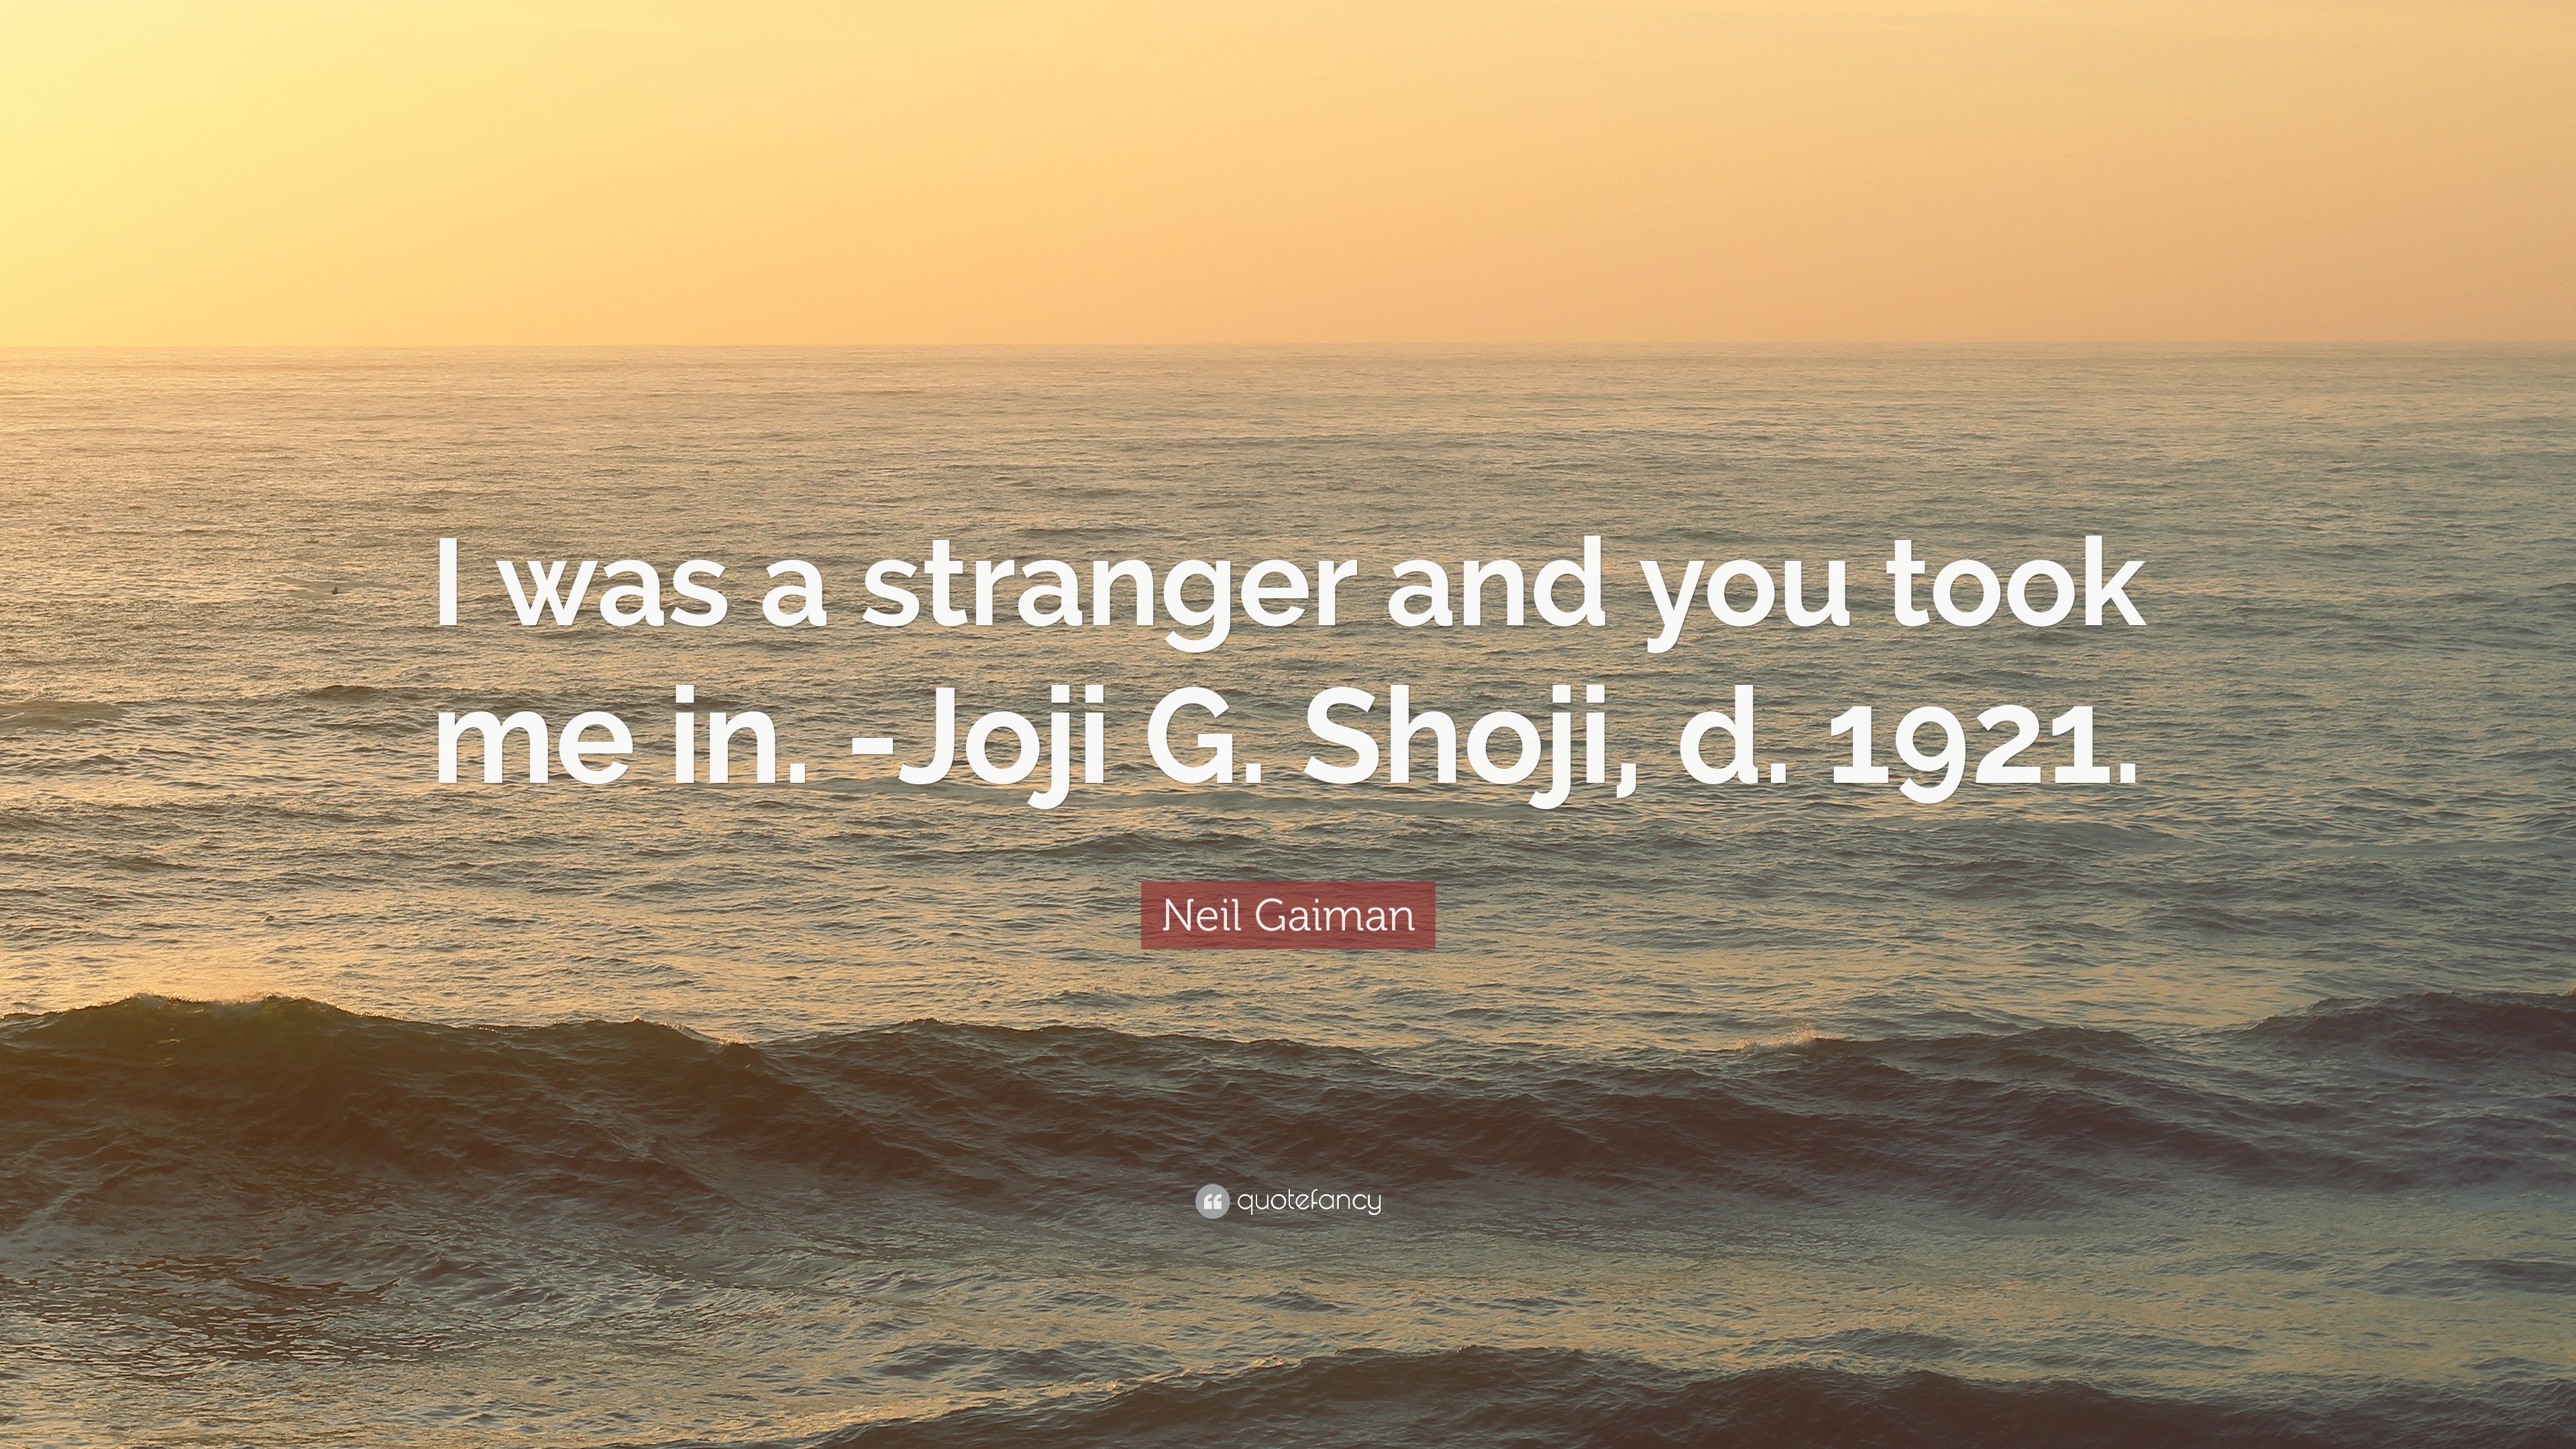 Neil Gaiman Quote: “I was a stranger and you took me in. -Joji G